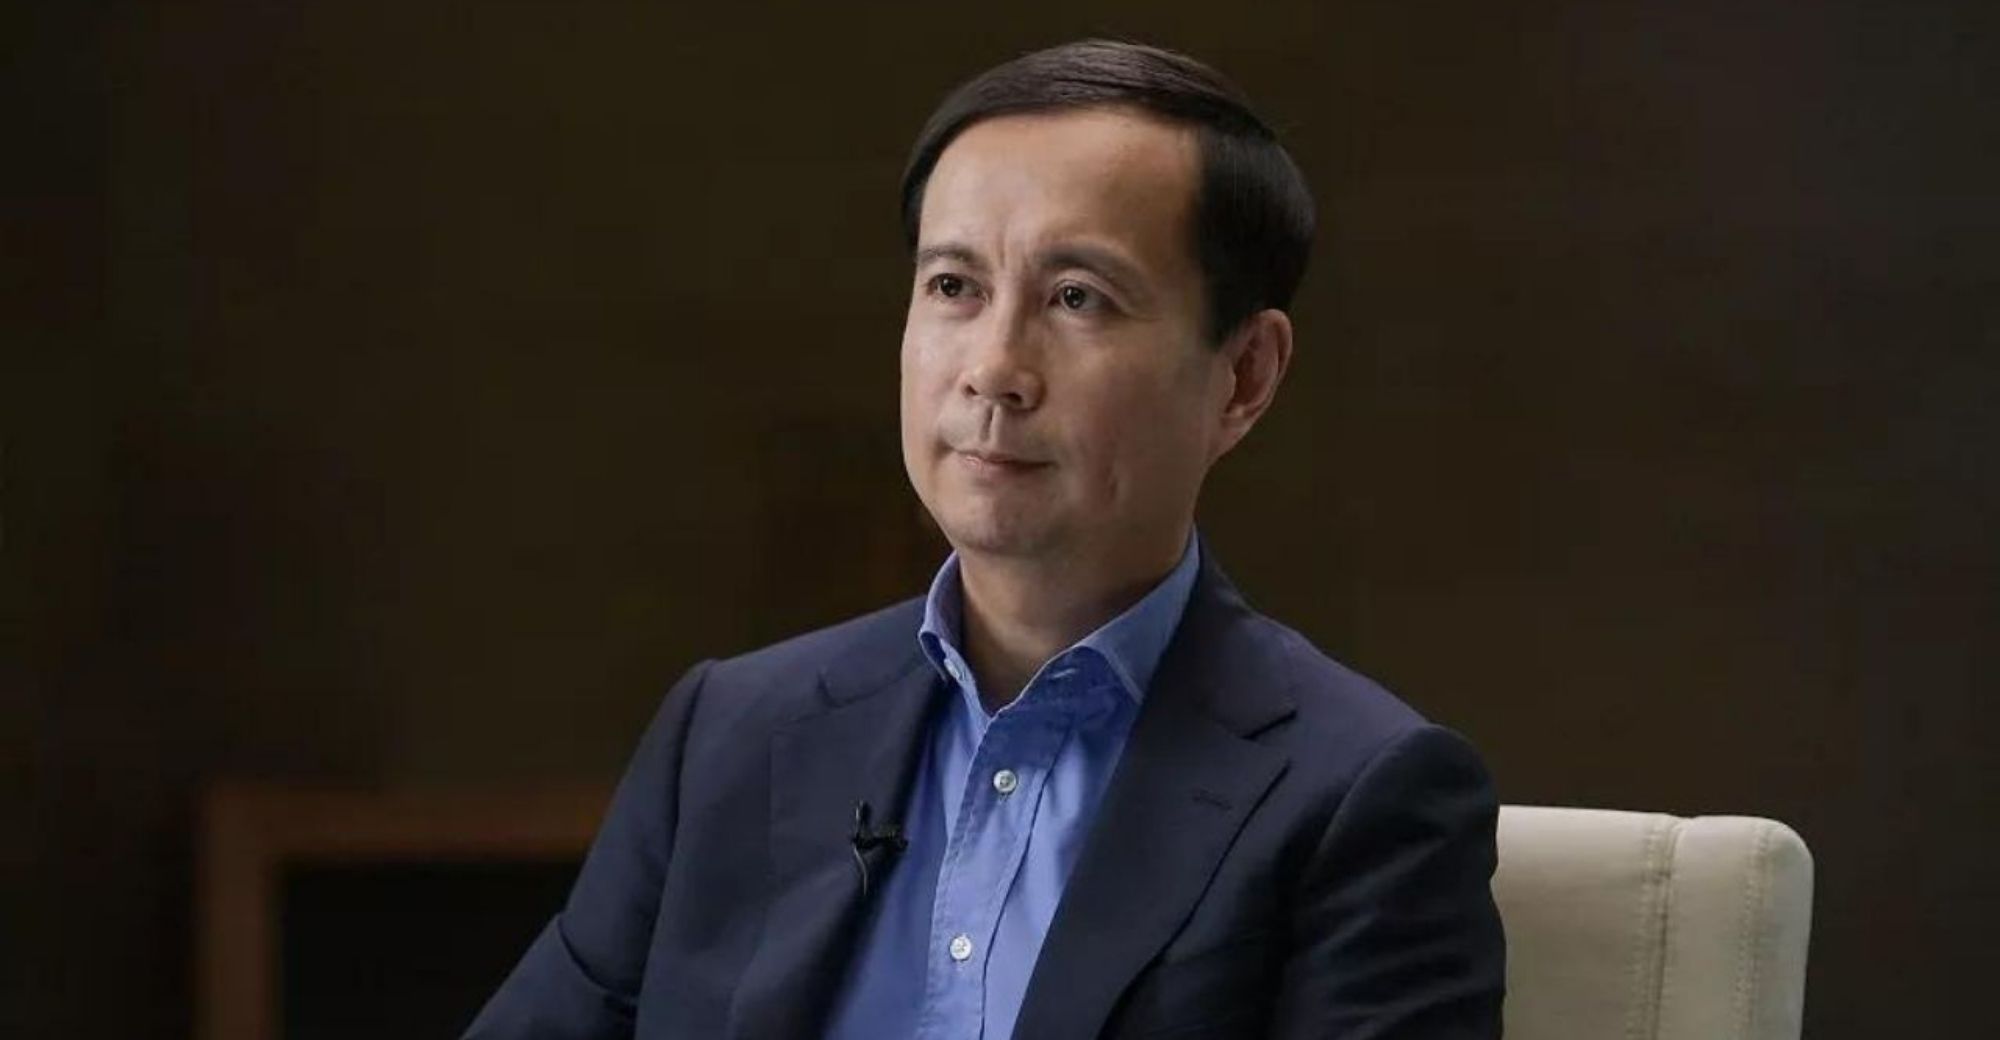 Alibaba CEO Daniel Zhang Steps Down as Legal Representative of Taobao and Tmall